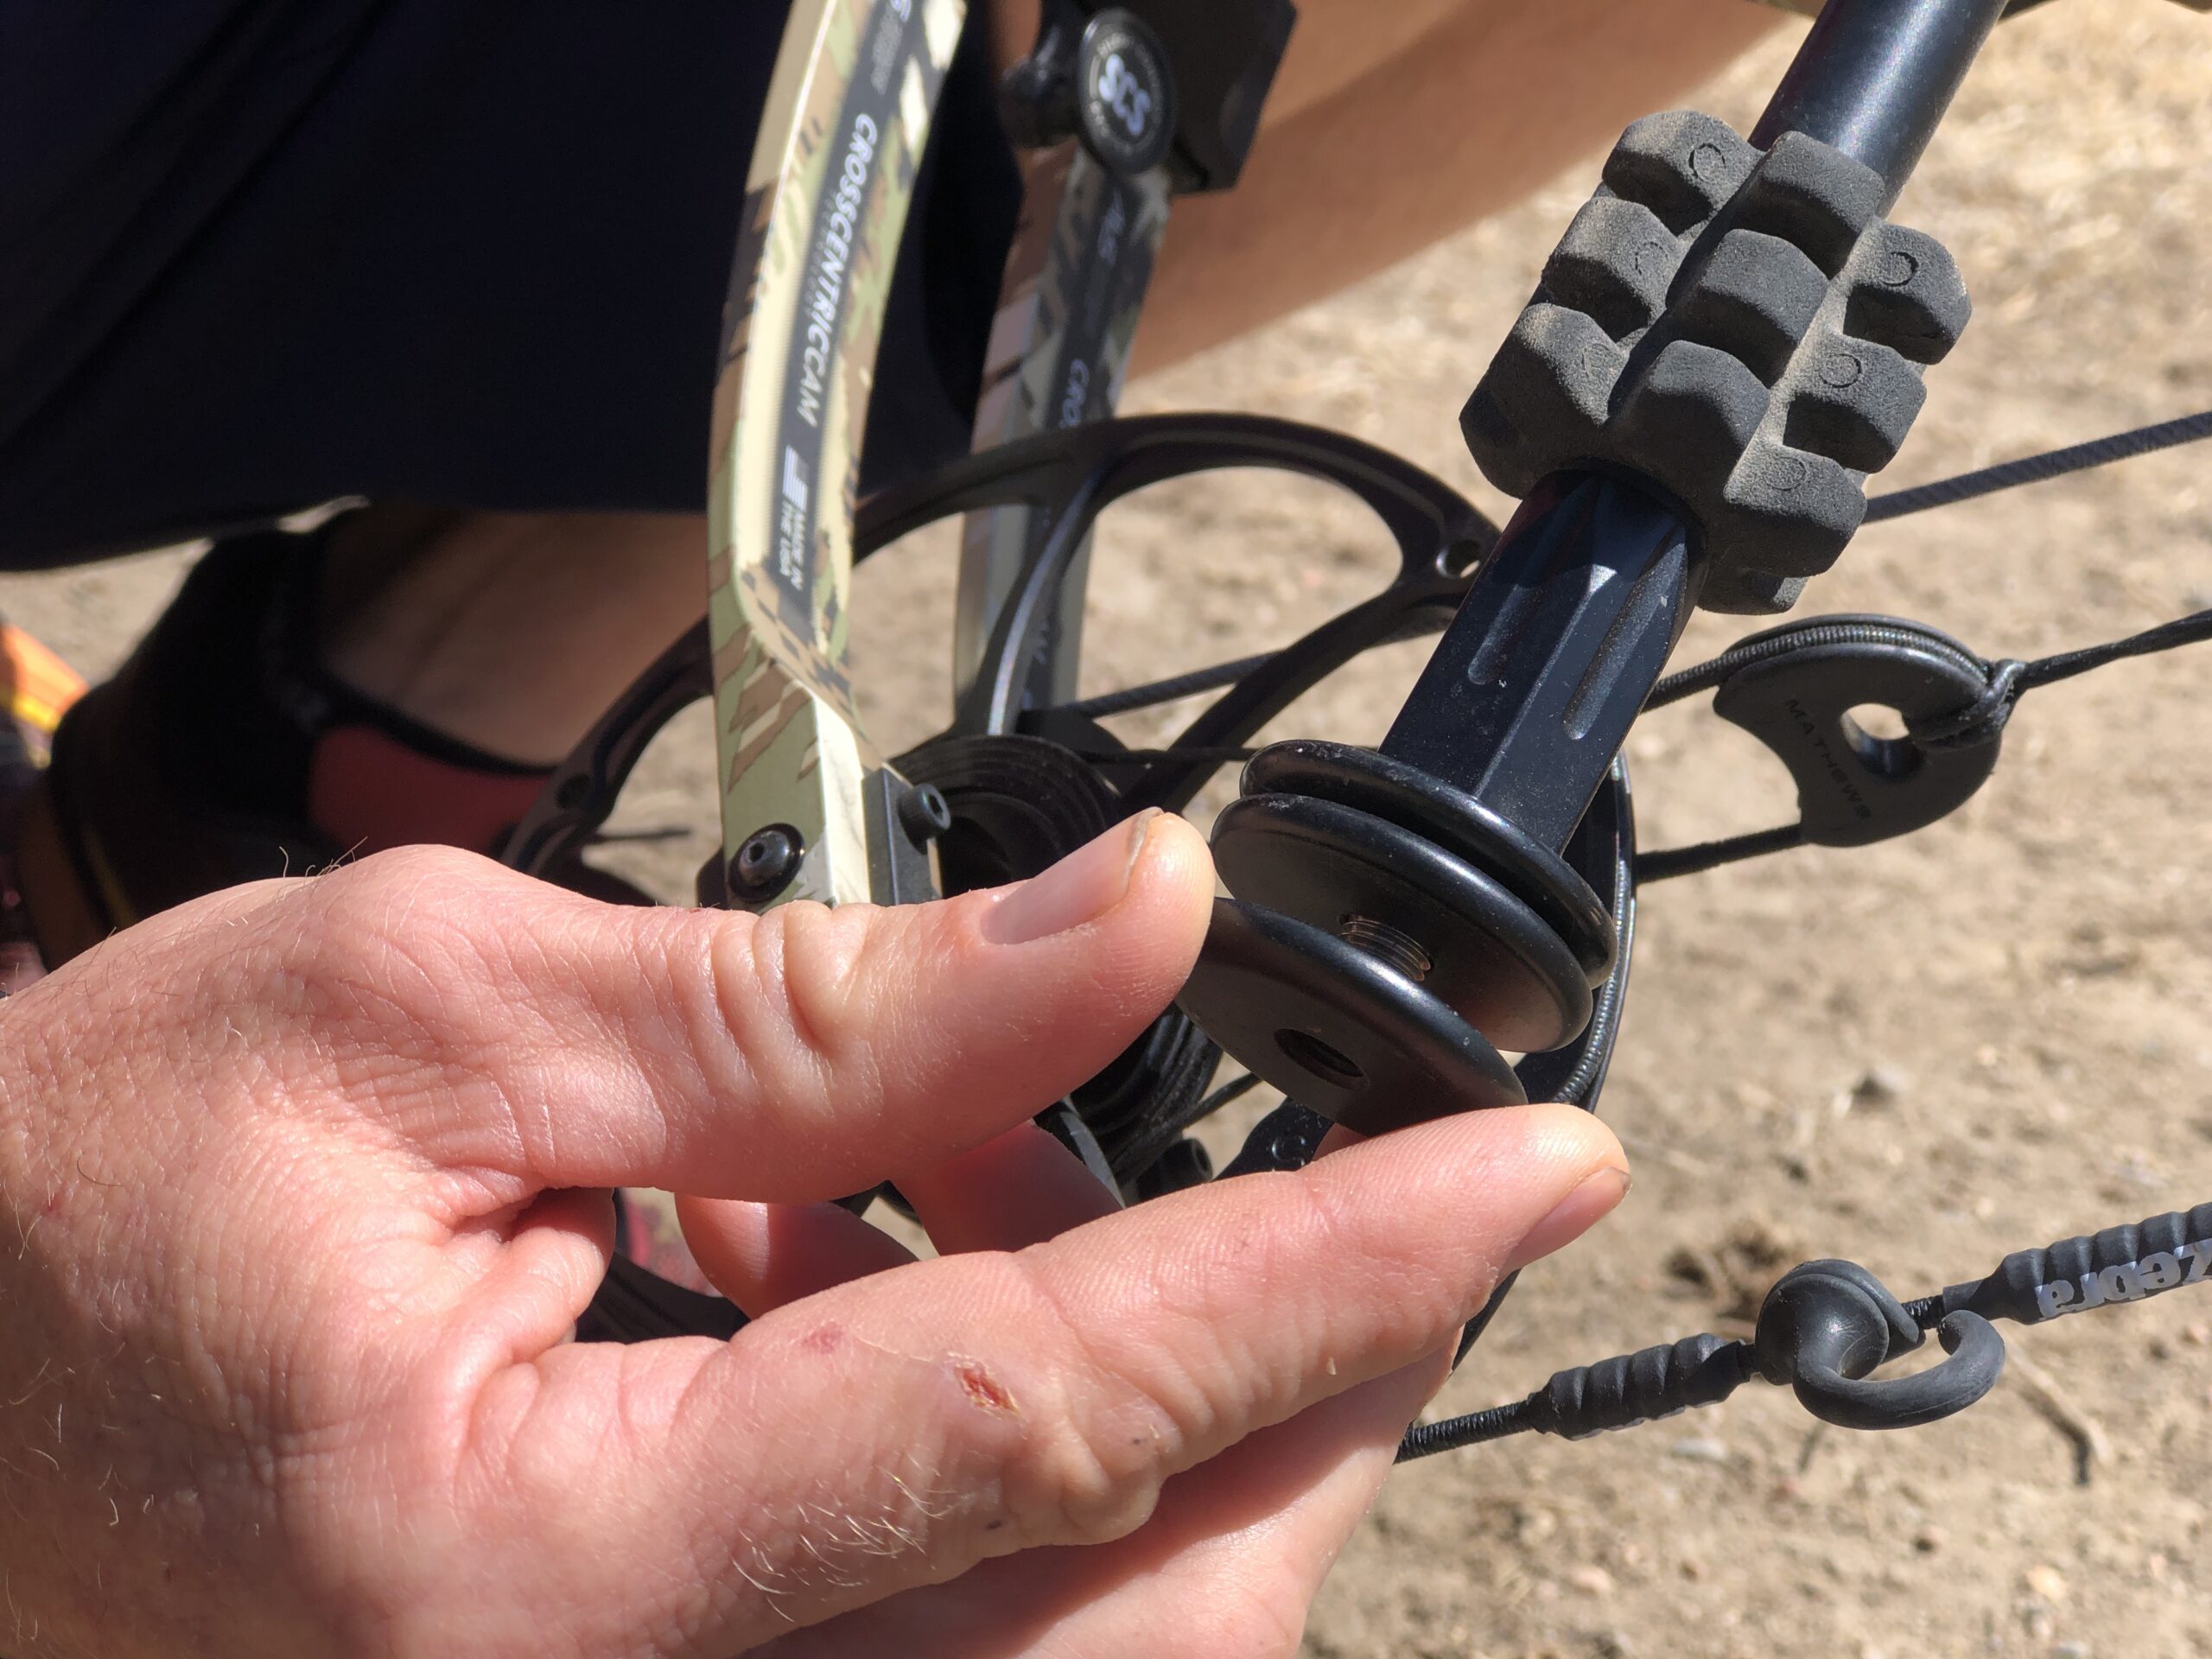 Stability is key for bowhunters, and a heavier bow will help with accuracy.